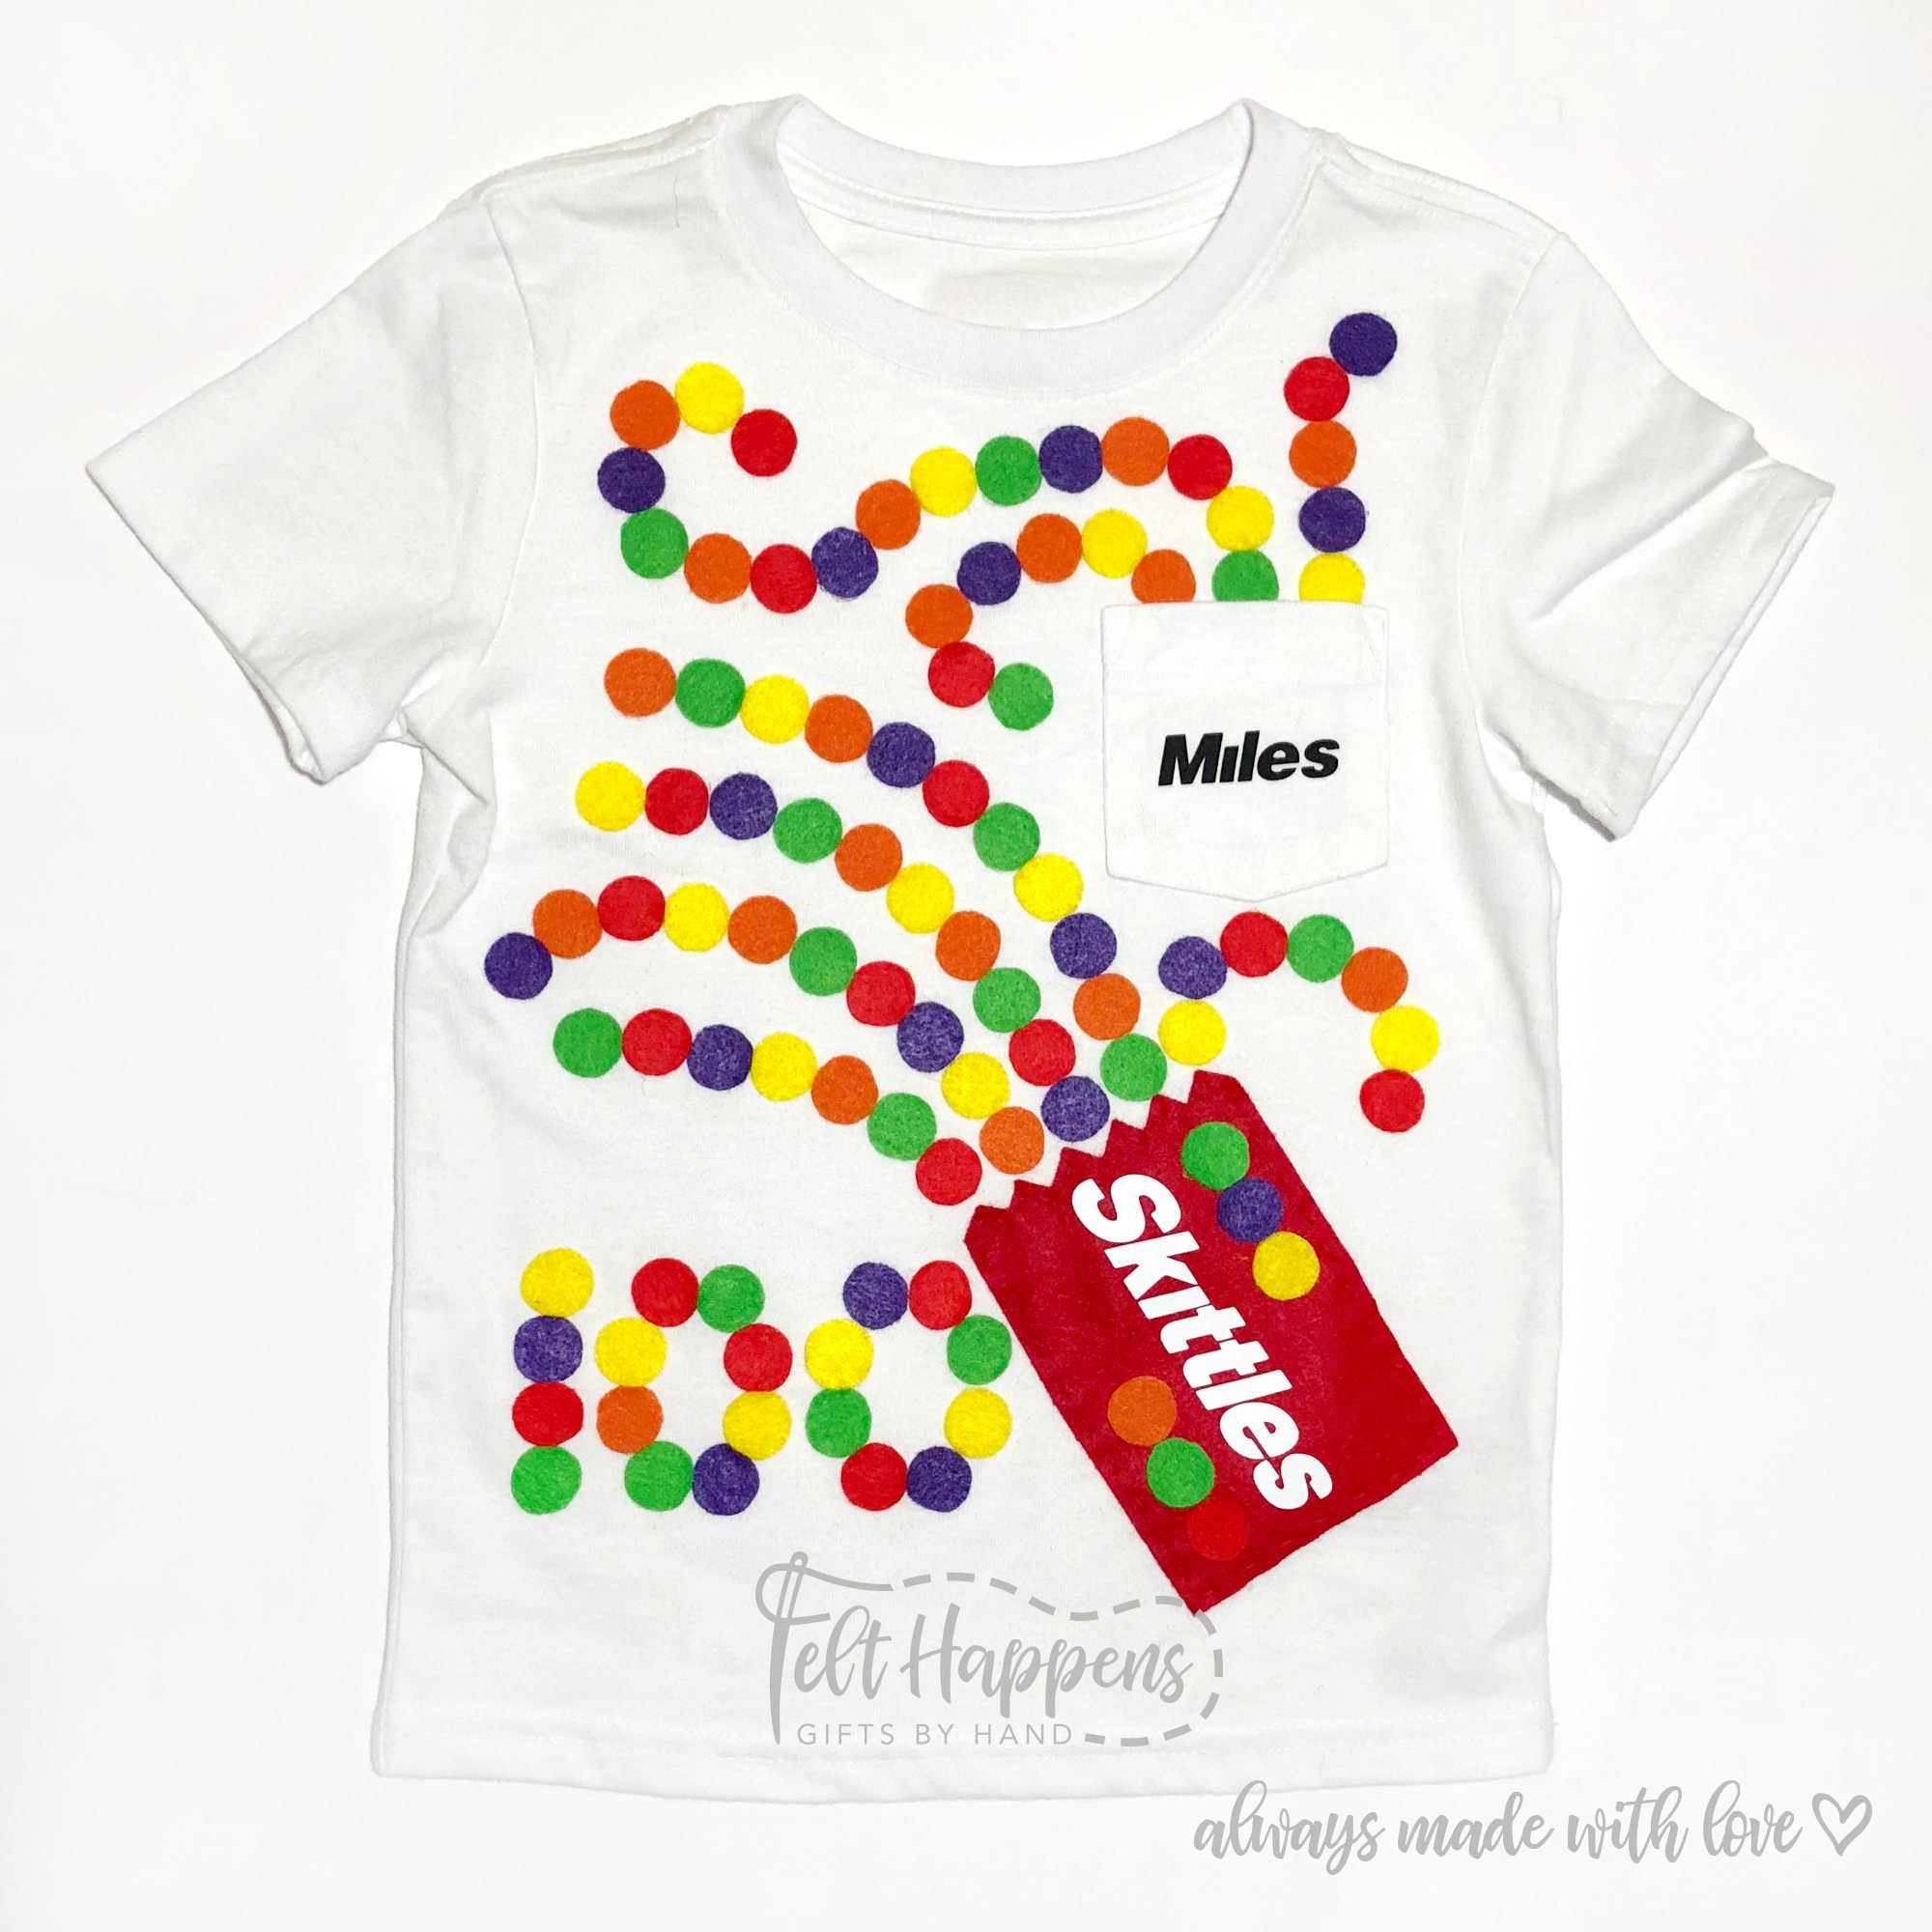 Easy 100 Days Of School Shirt Ideas Happiness Is Homemade - tshirt for kids roblox shirt sky blue poly cotton ootd fashion printed trending top boys girls customized vinyl gift